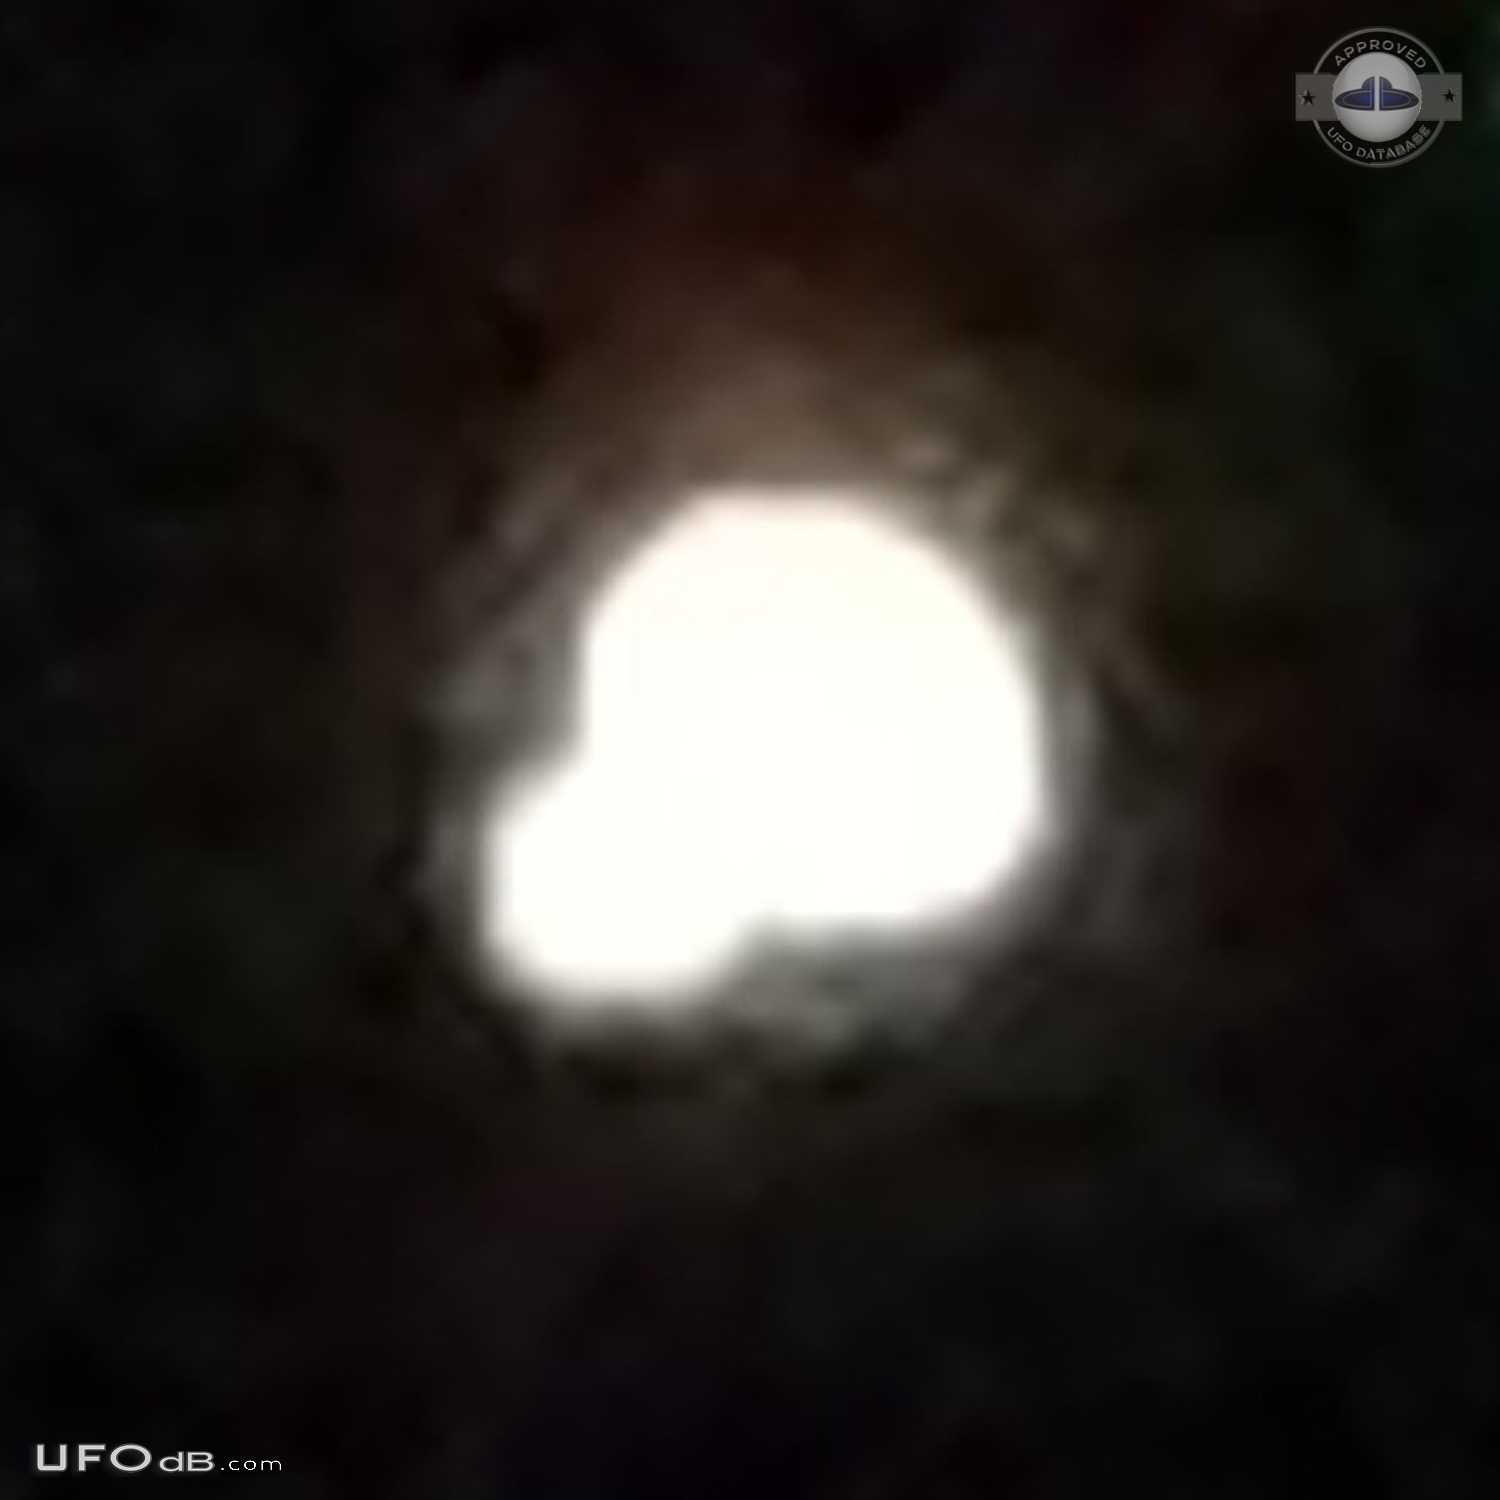 helicopter tractor beamed ufo and both flew off together - Las Vegas N UFO Picture #754-3